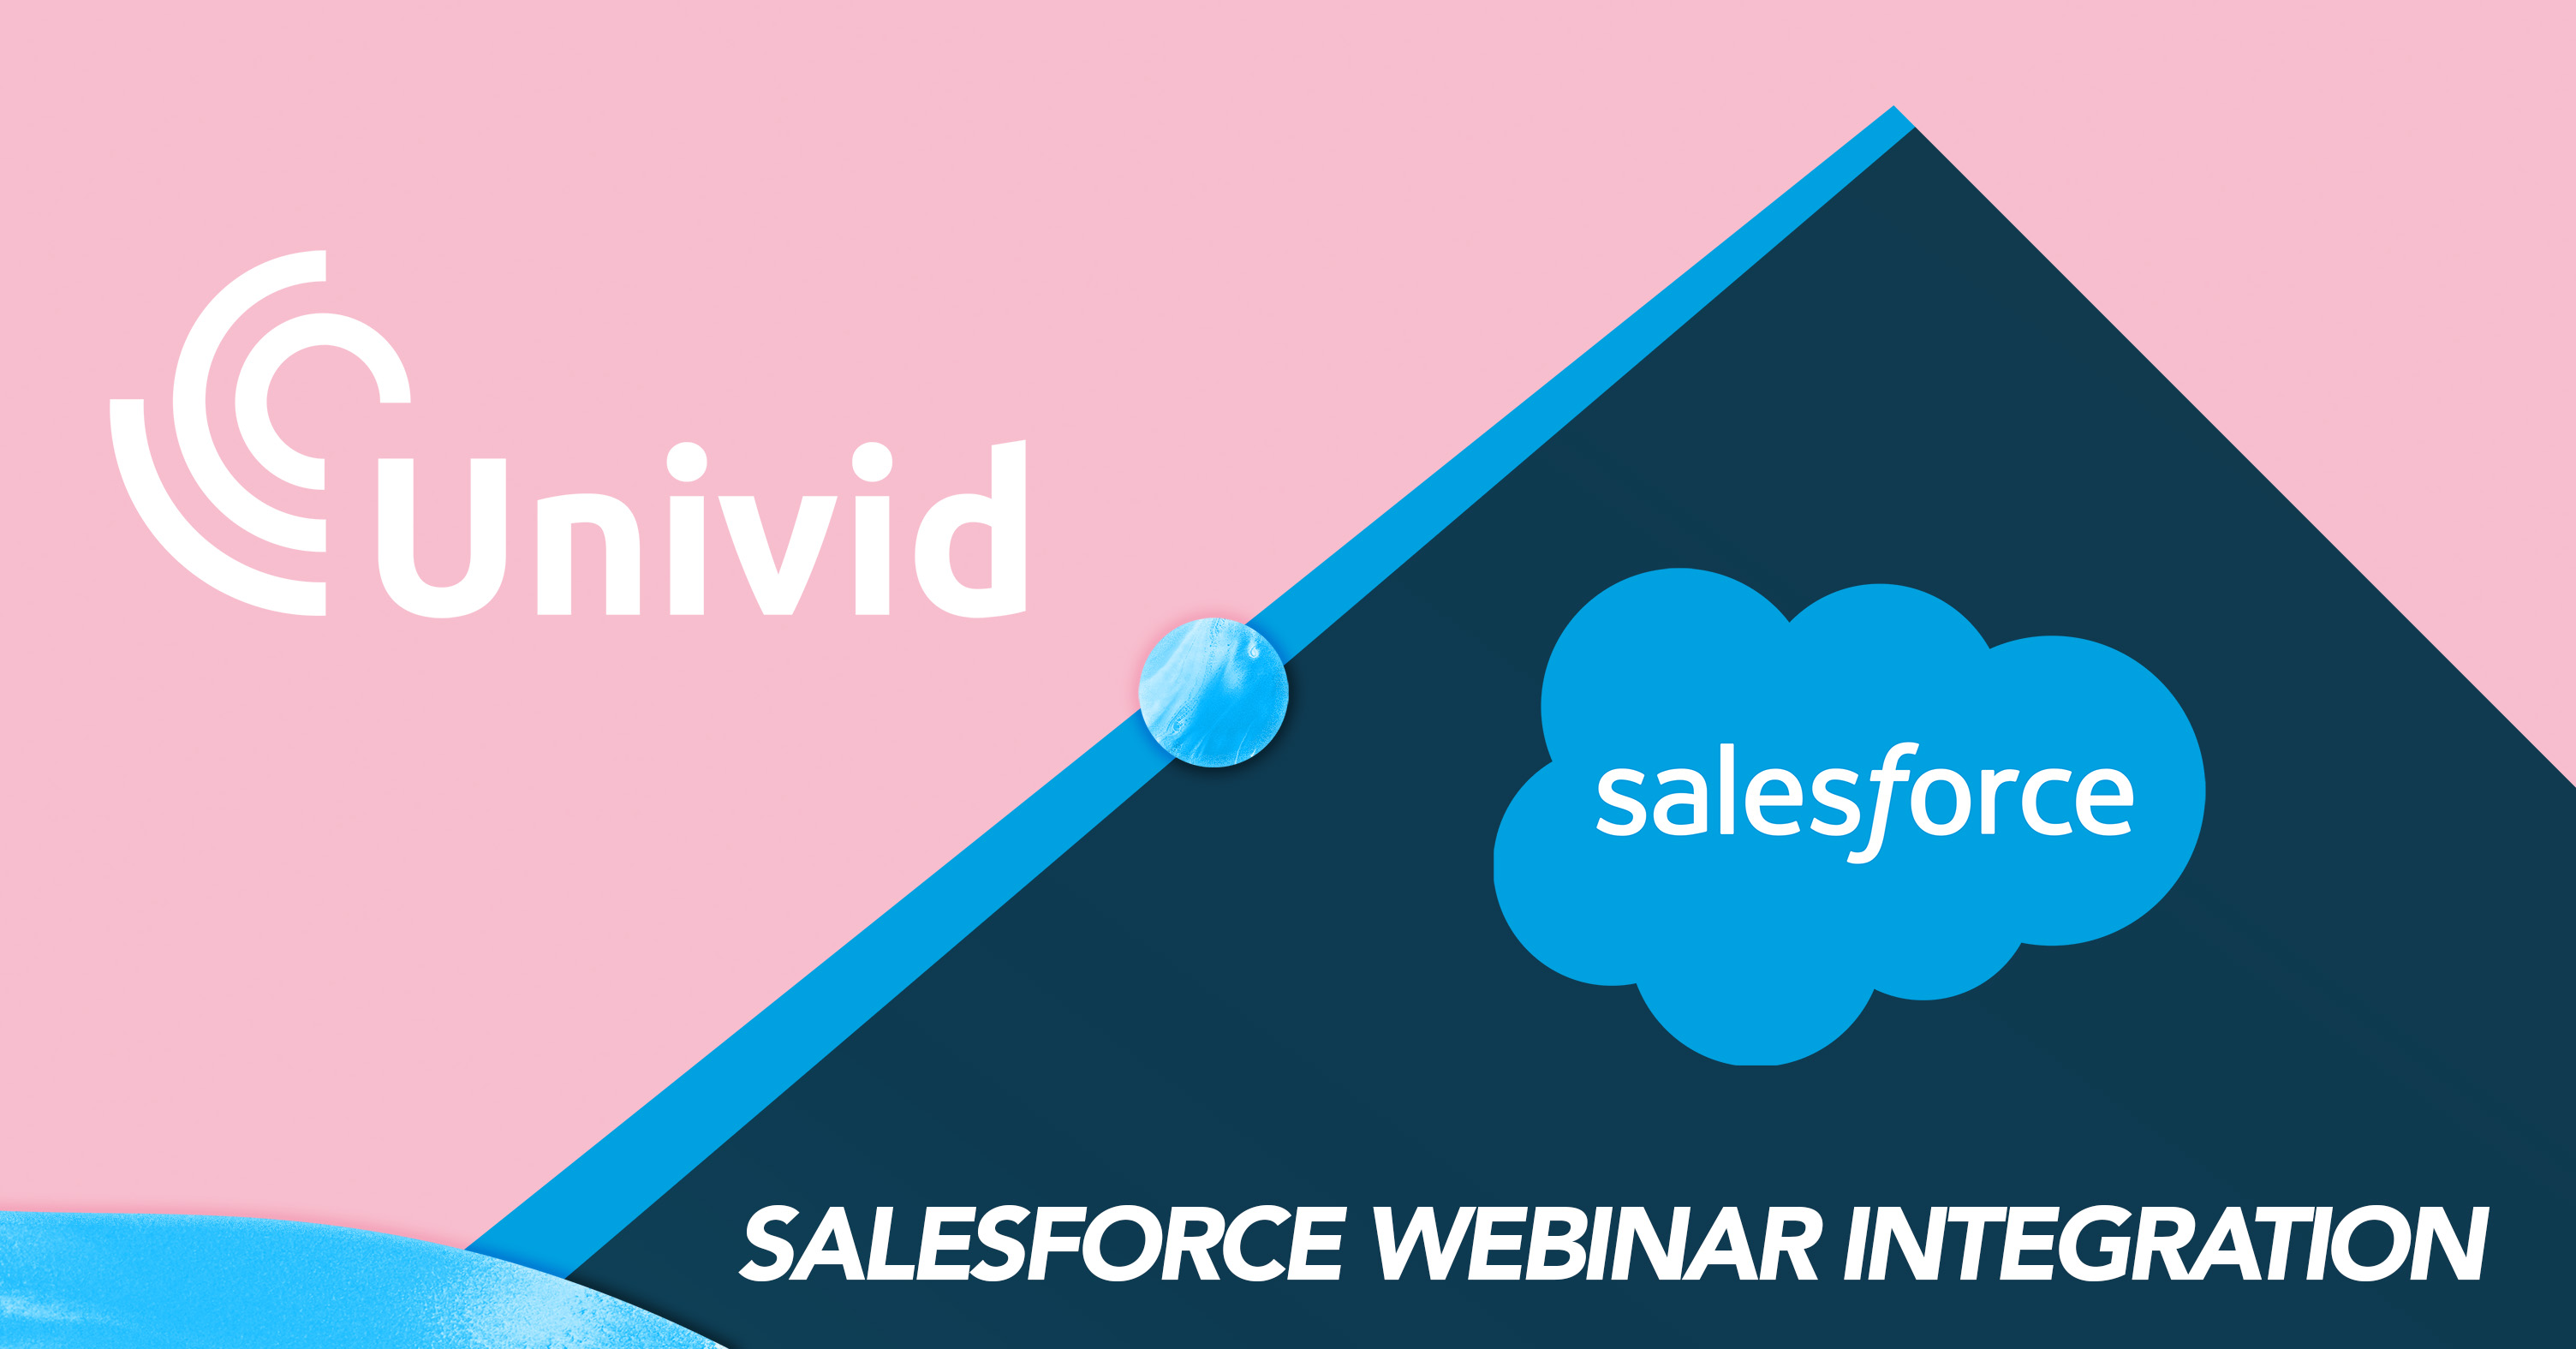 Connect your Univid webinars with Salesforce CRM - through this Salesforce webinar integration. Built to supercharge your sales, conversions, and insights.